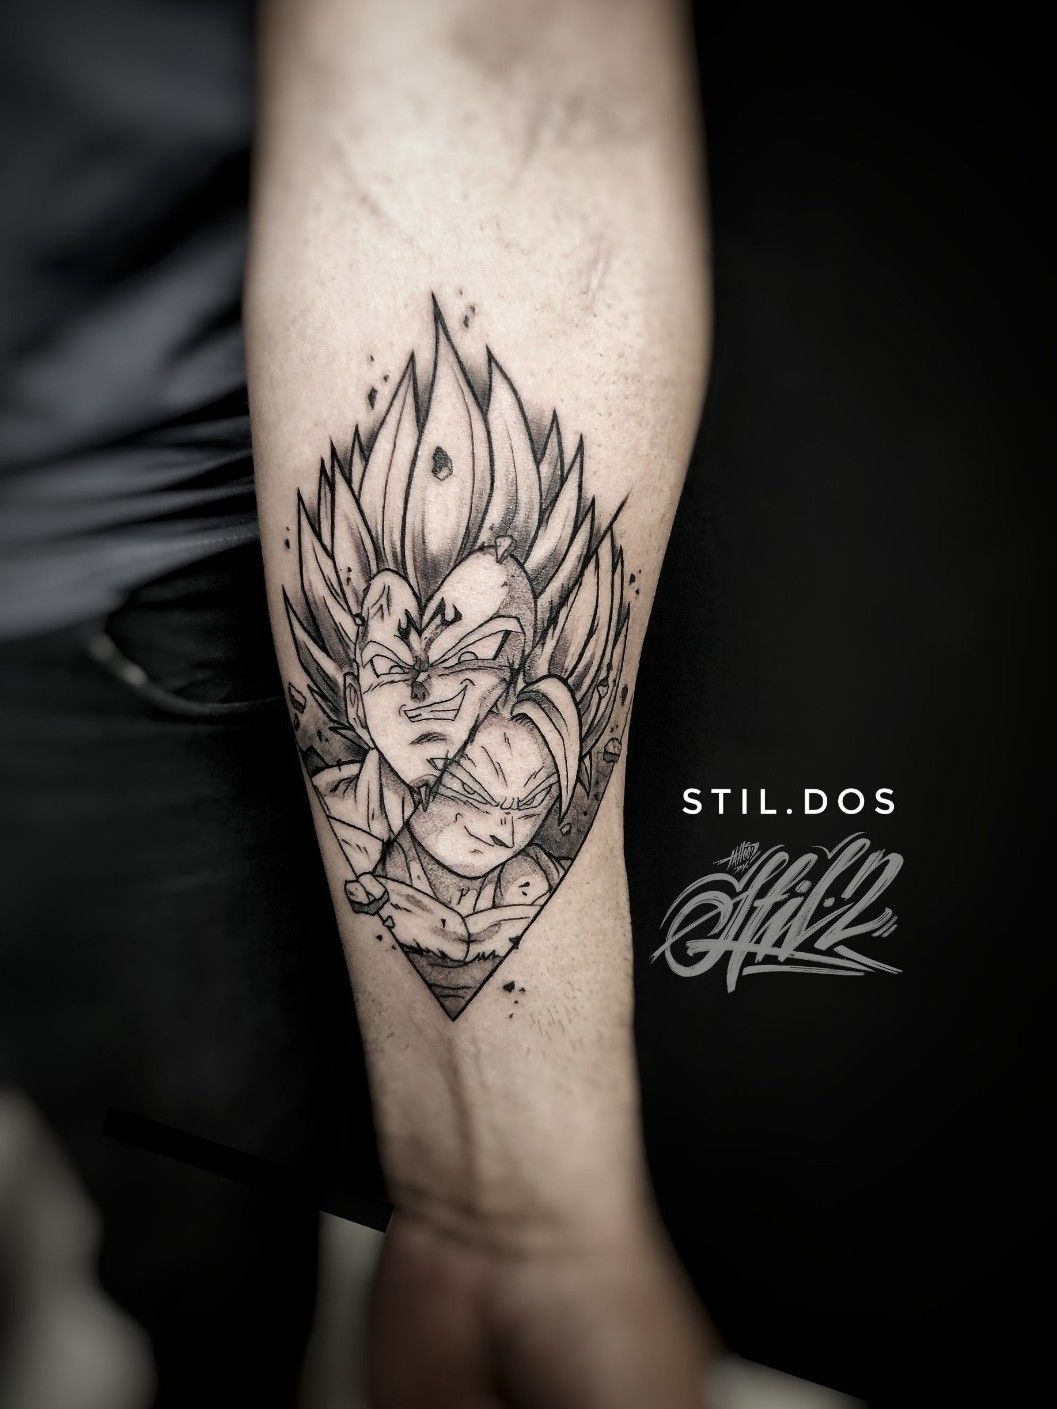 My first tattoos Goku  Vegeta Delighted with how they turned out  rdbz